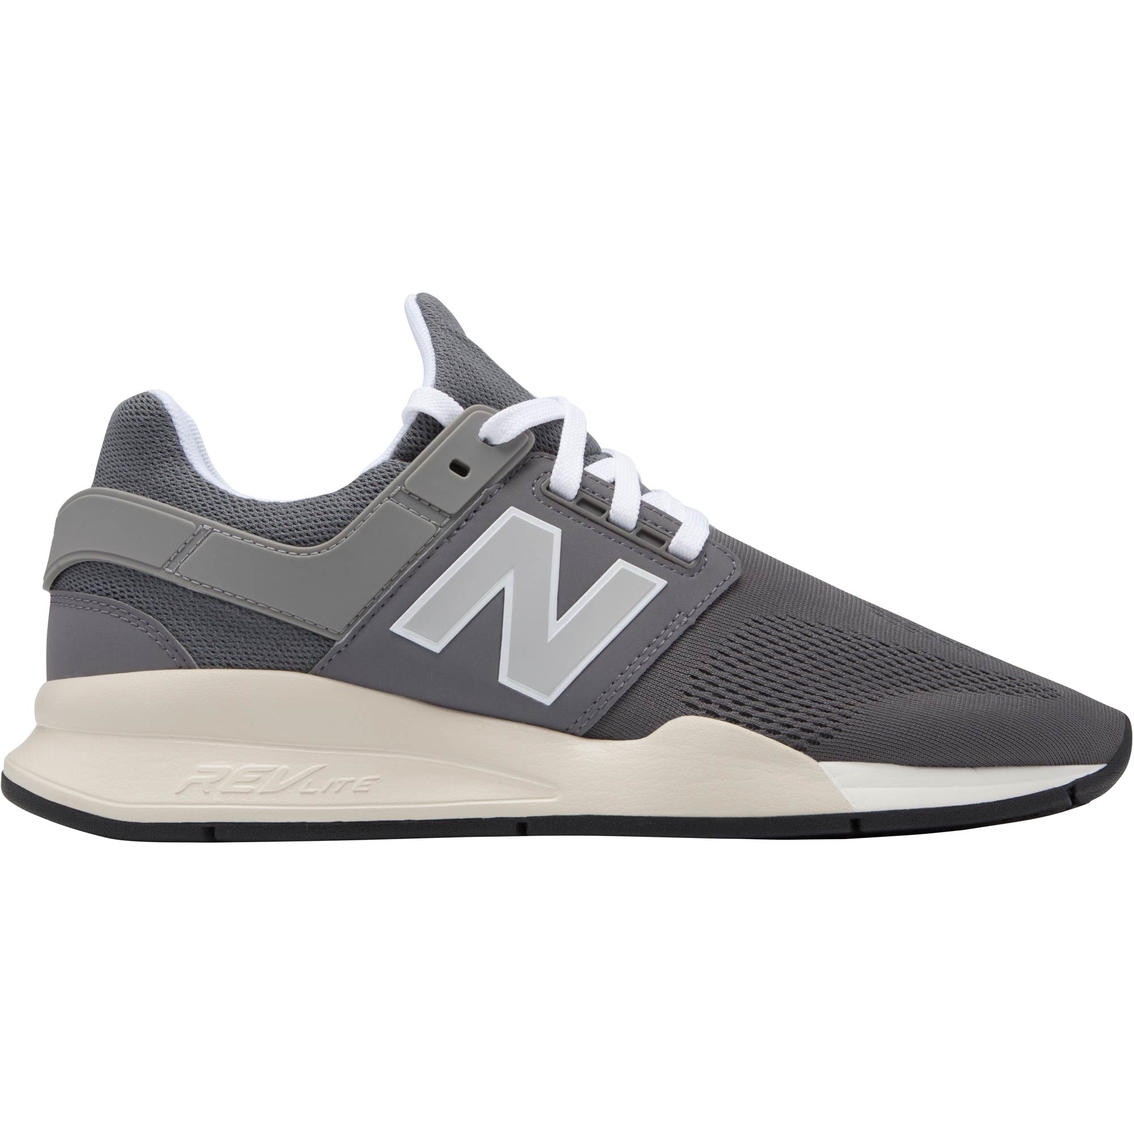 New Balance Men's Lifestyle Athletic Shoes M5247mm | Sneakers | Shoes ...